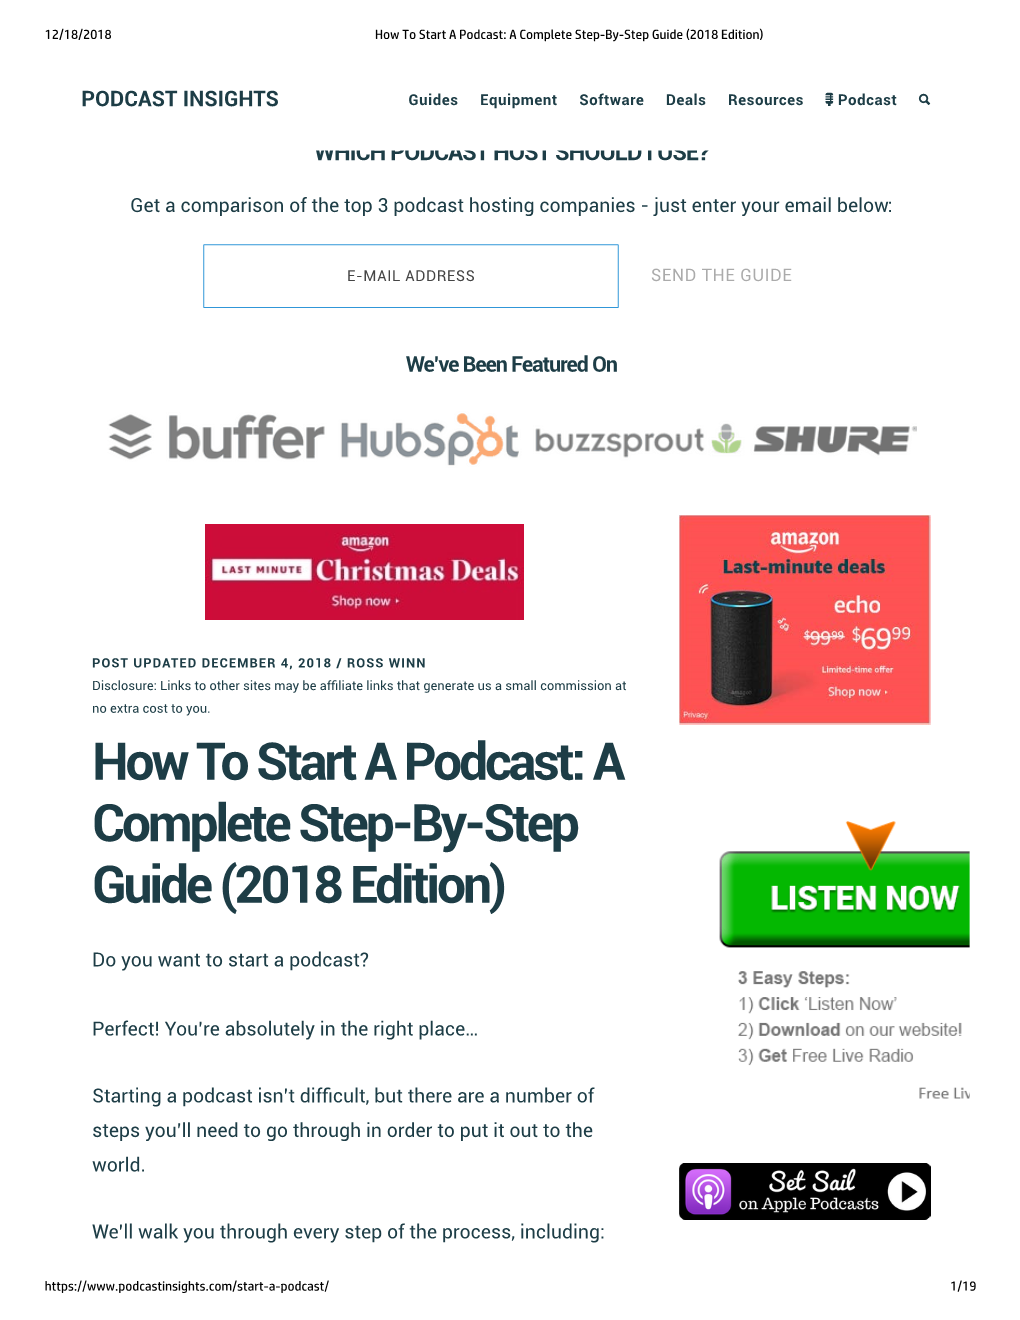 How to Start a Podcast: a Complete Step-By-Step Guide (2018 Edition)